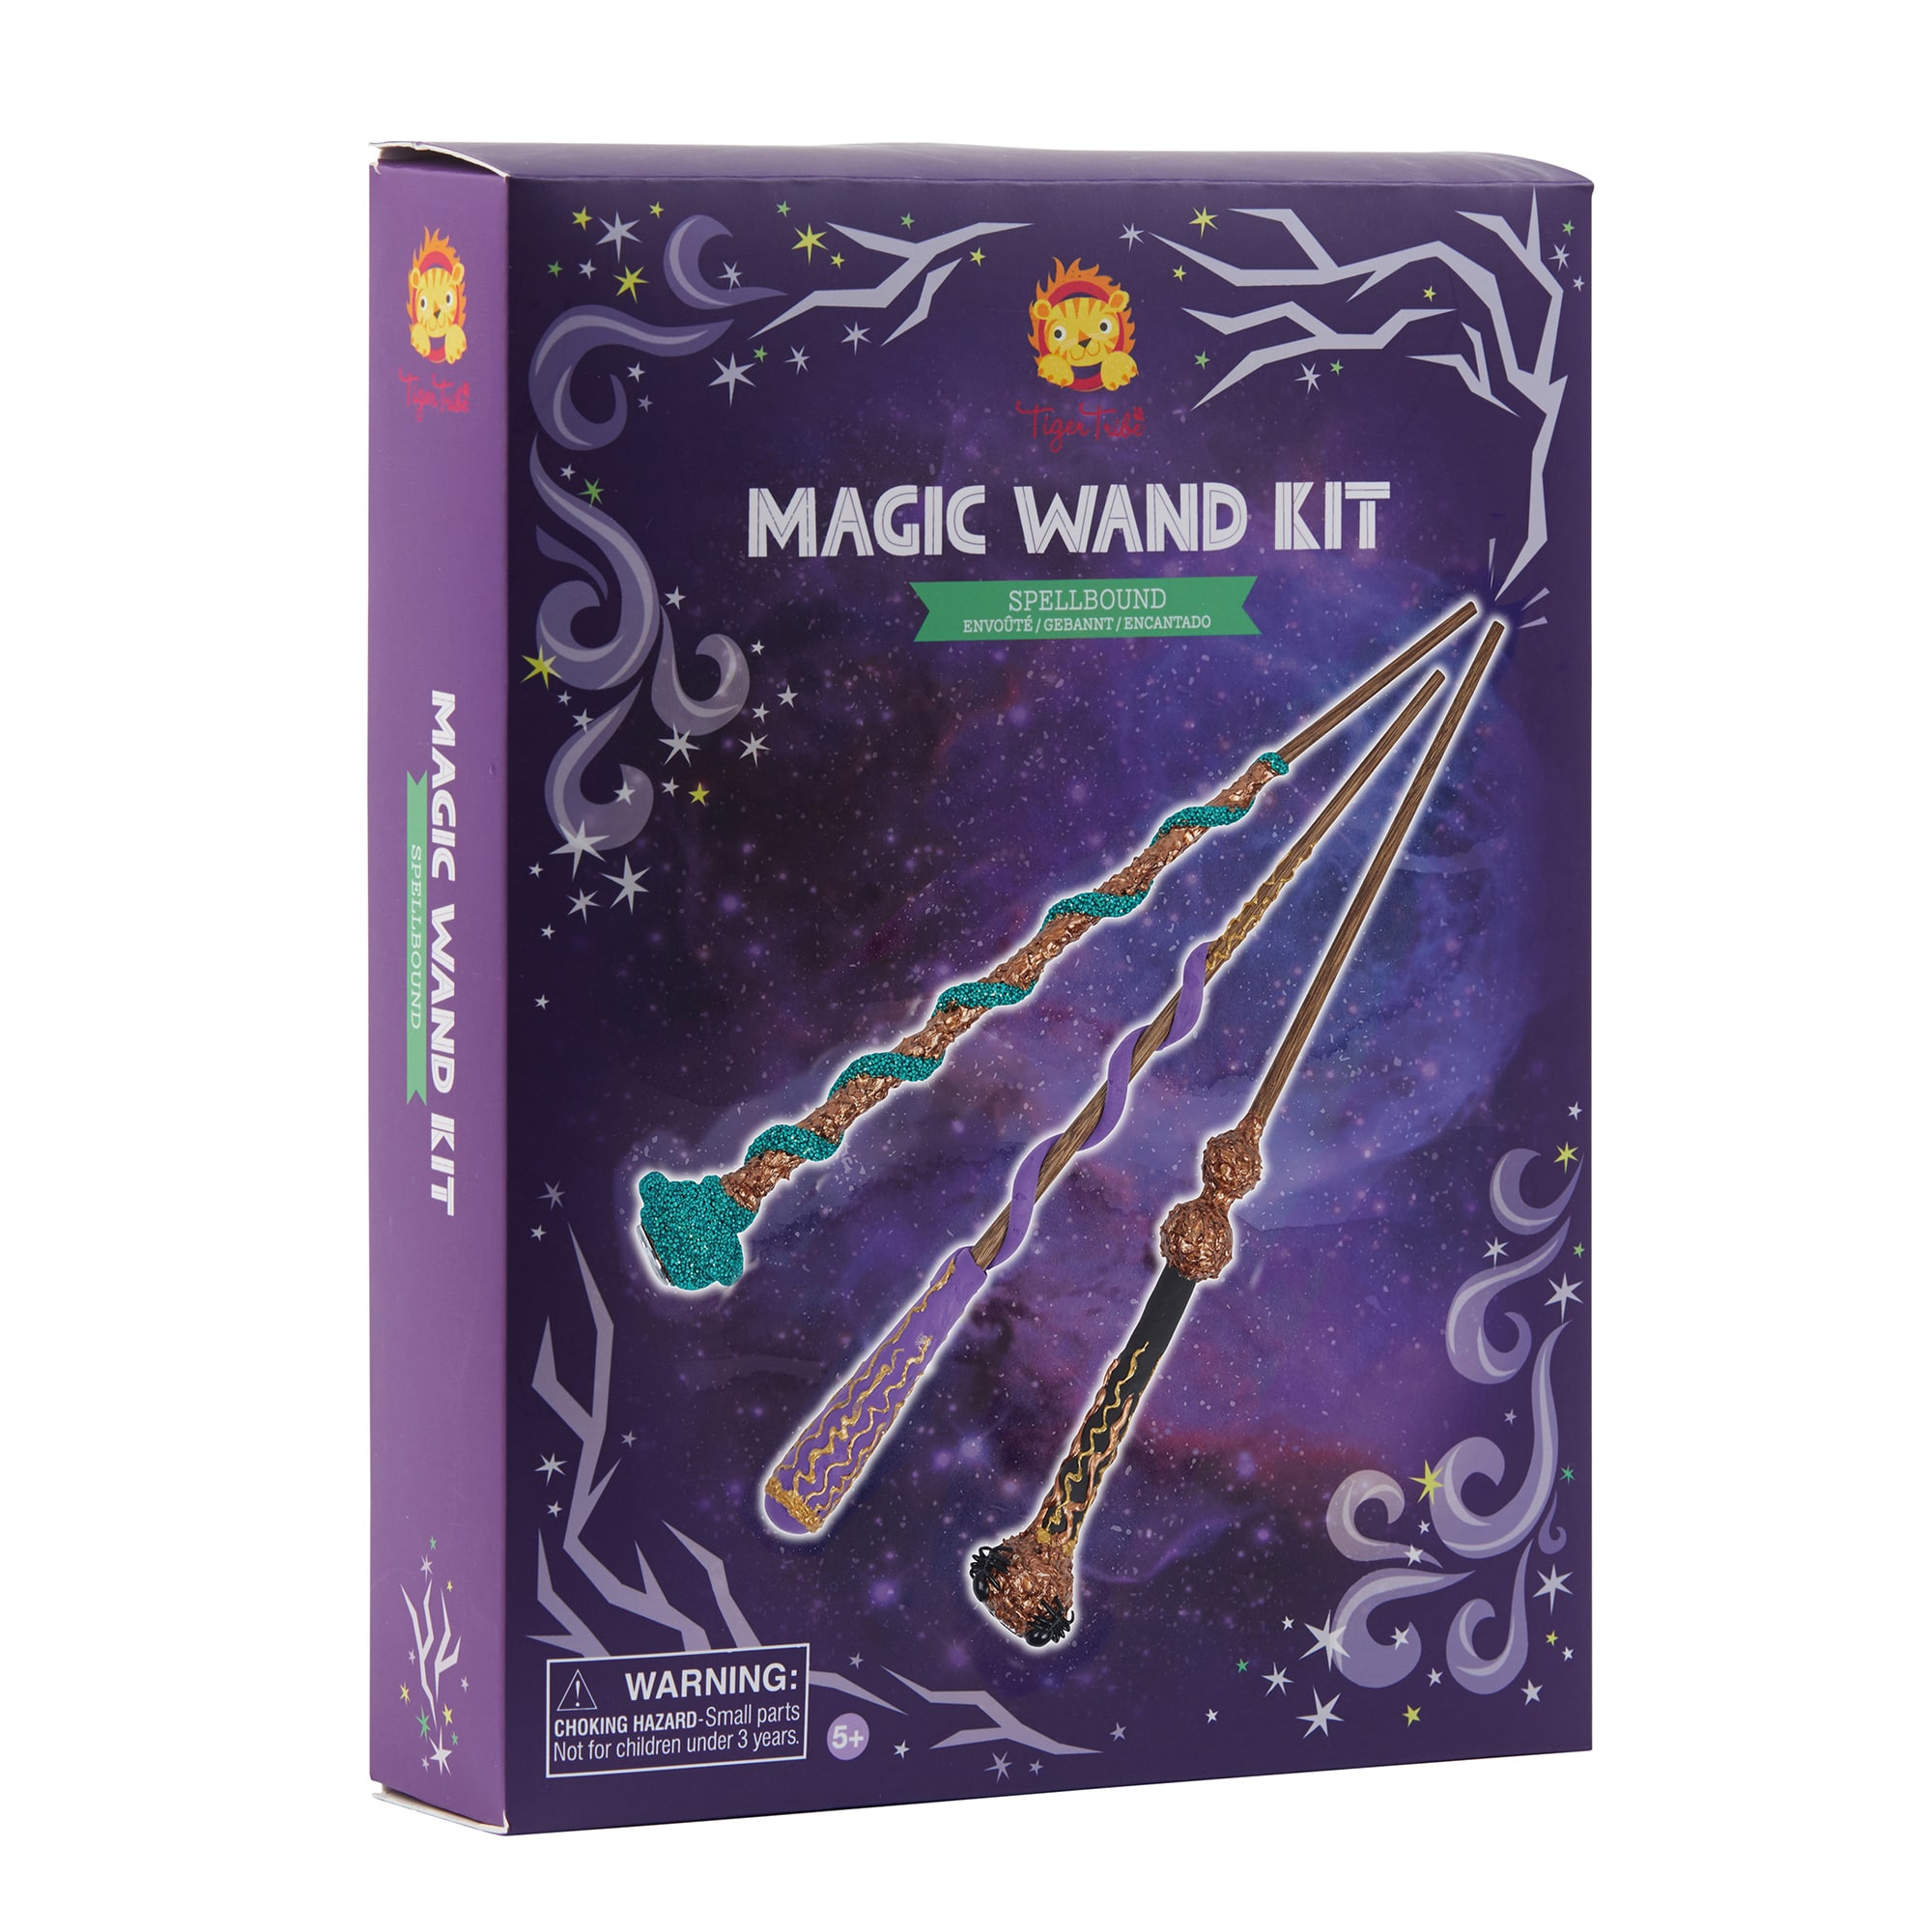 https://schylling.com/wp-content/uploads/2021/01/60633-Tiger-Tribe-Magic-Wand-Kit-Spellbound-Pkg-3Q-Right-web.jpg